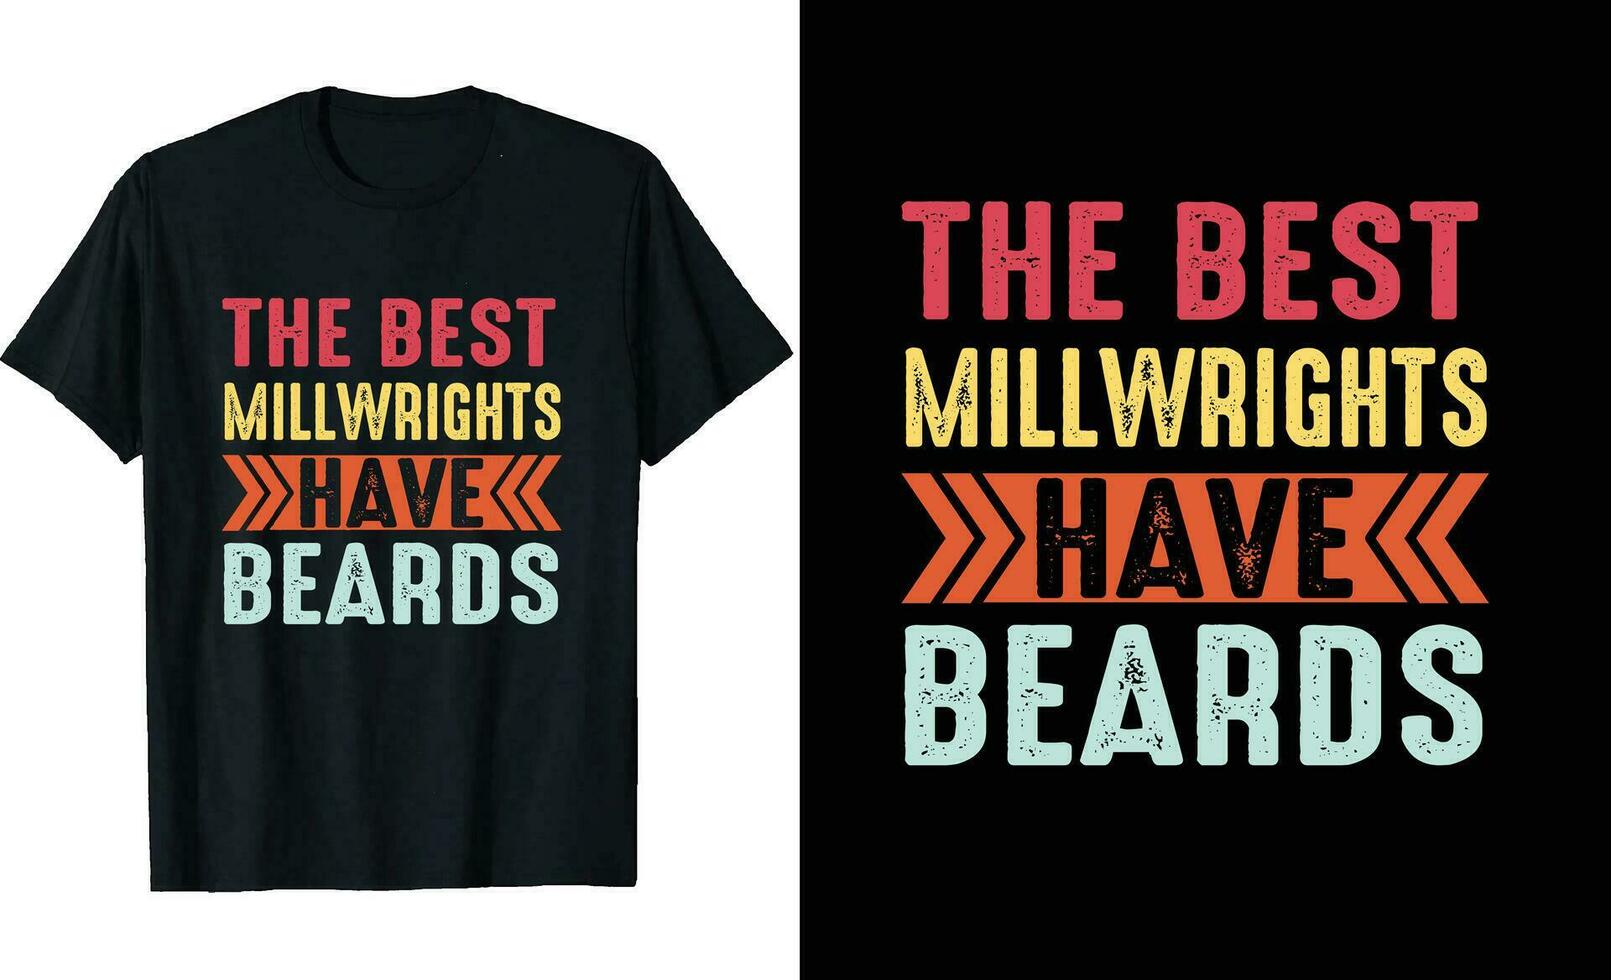 Best Millwrights Have Beards Funny Millwrights Long Sleeve T-Shirt or Millwrights t shirt design or Beards t-shirt design vector